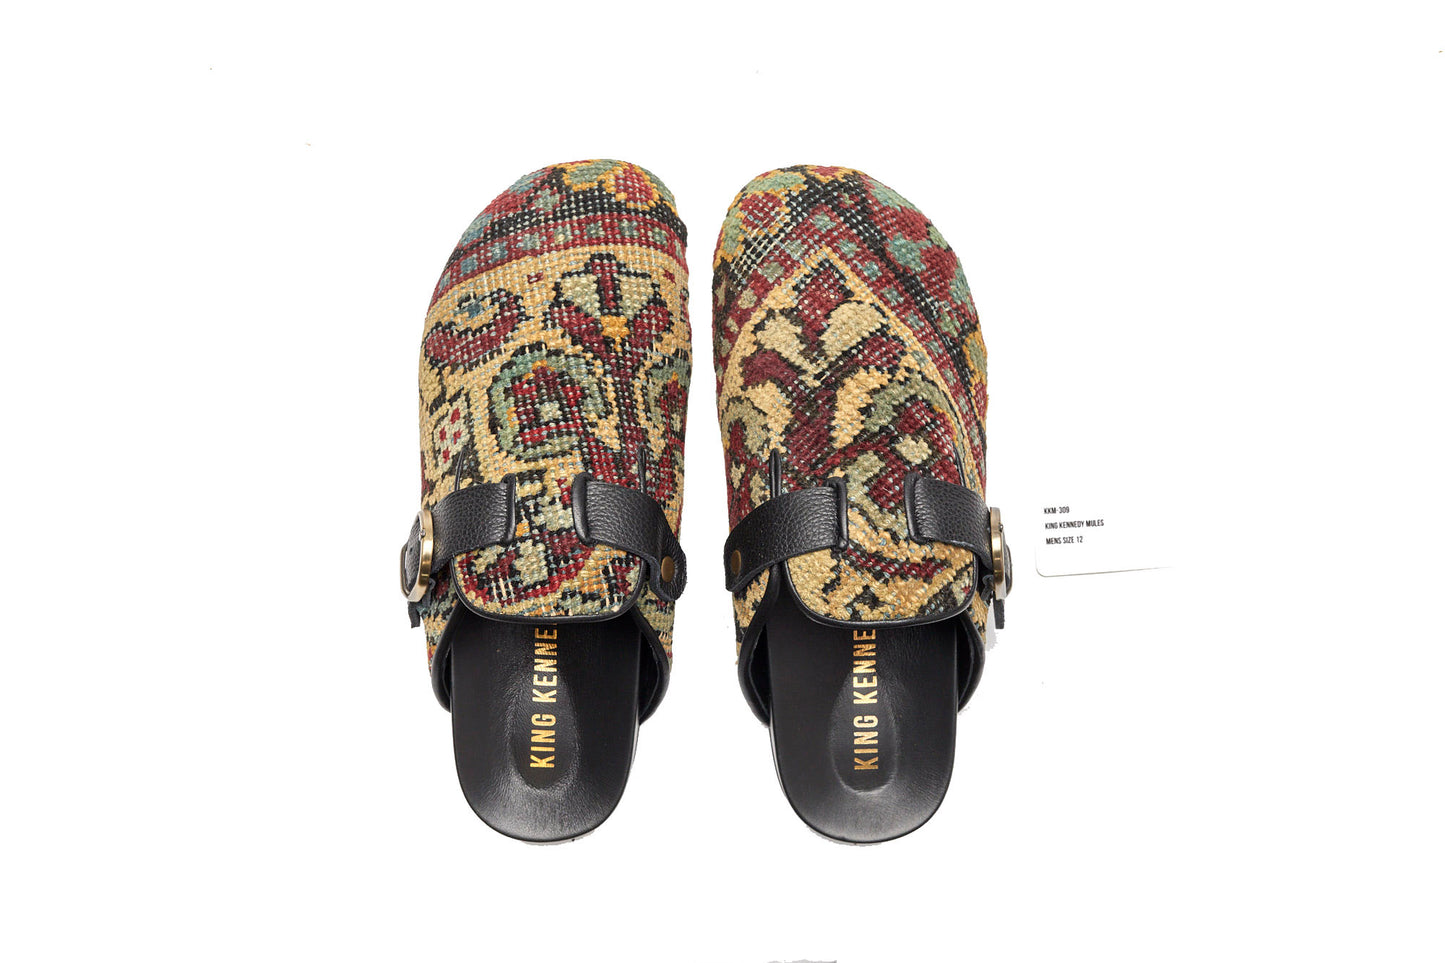 King Kennedy Rug Mules are one-of-a-kind and made of 100 year old antique Persian rug fragments with soft lambskin footbed and comfortable rubber sole. This pair is made of an antique Persian rug featuring a pale yellow gold base with faded green, red and blue floral motifs. 